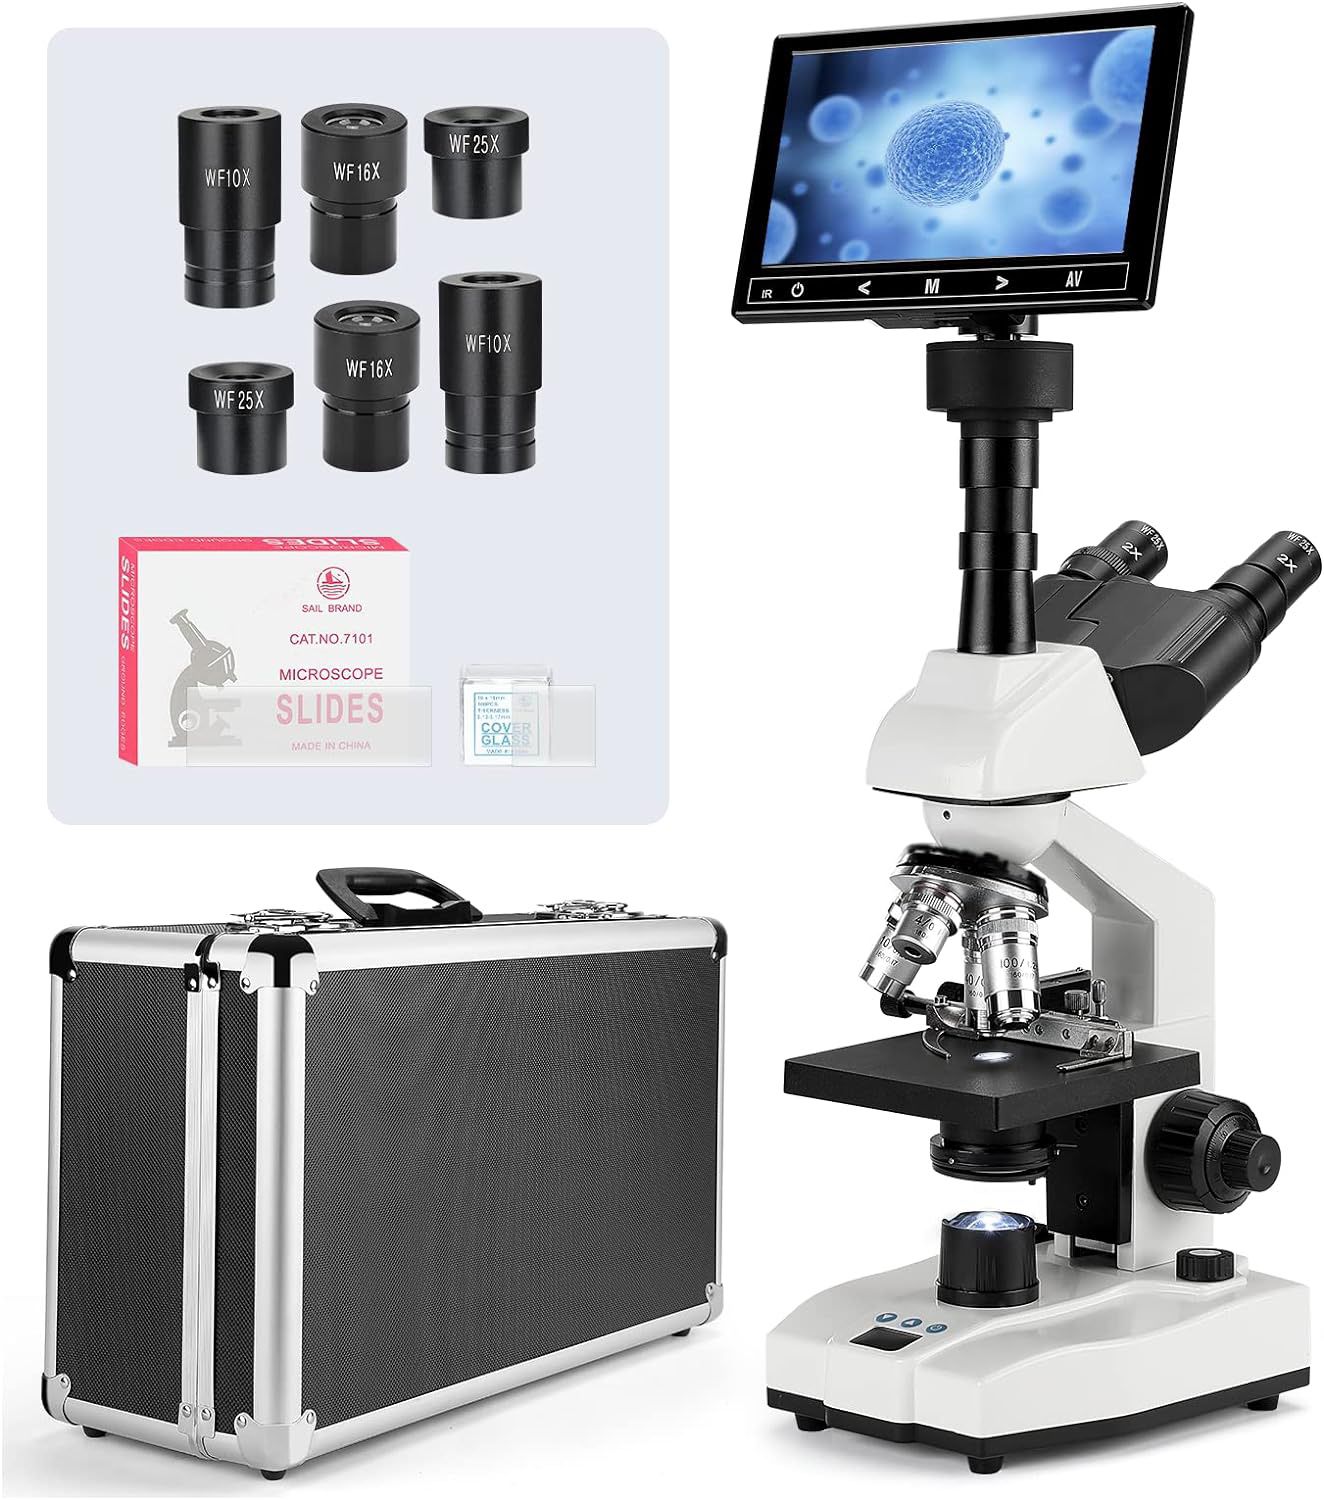 Vabiooth [Constant Temperature] Vabiooth Lab Trinocular Compound Microscope 40X-2500X Magnification with 7"| Monitor 5MP E-Eyepiece, Adjustable Thermo